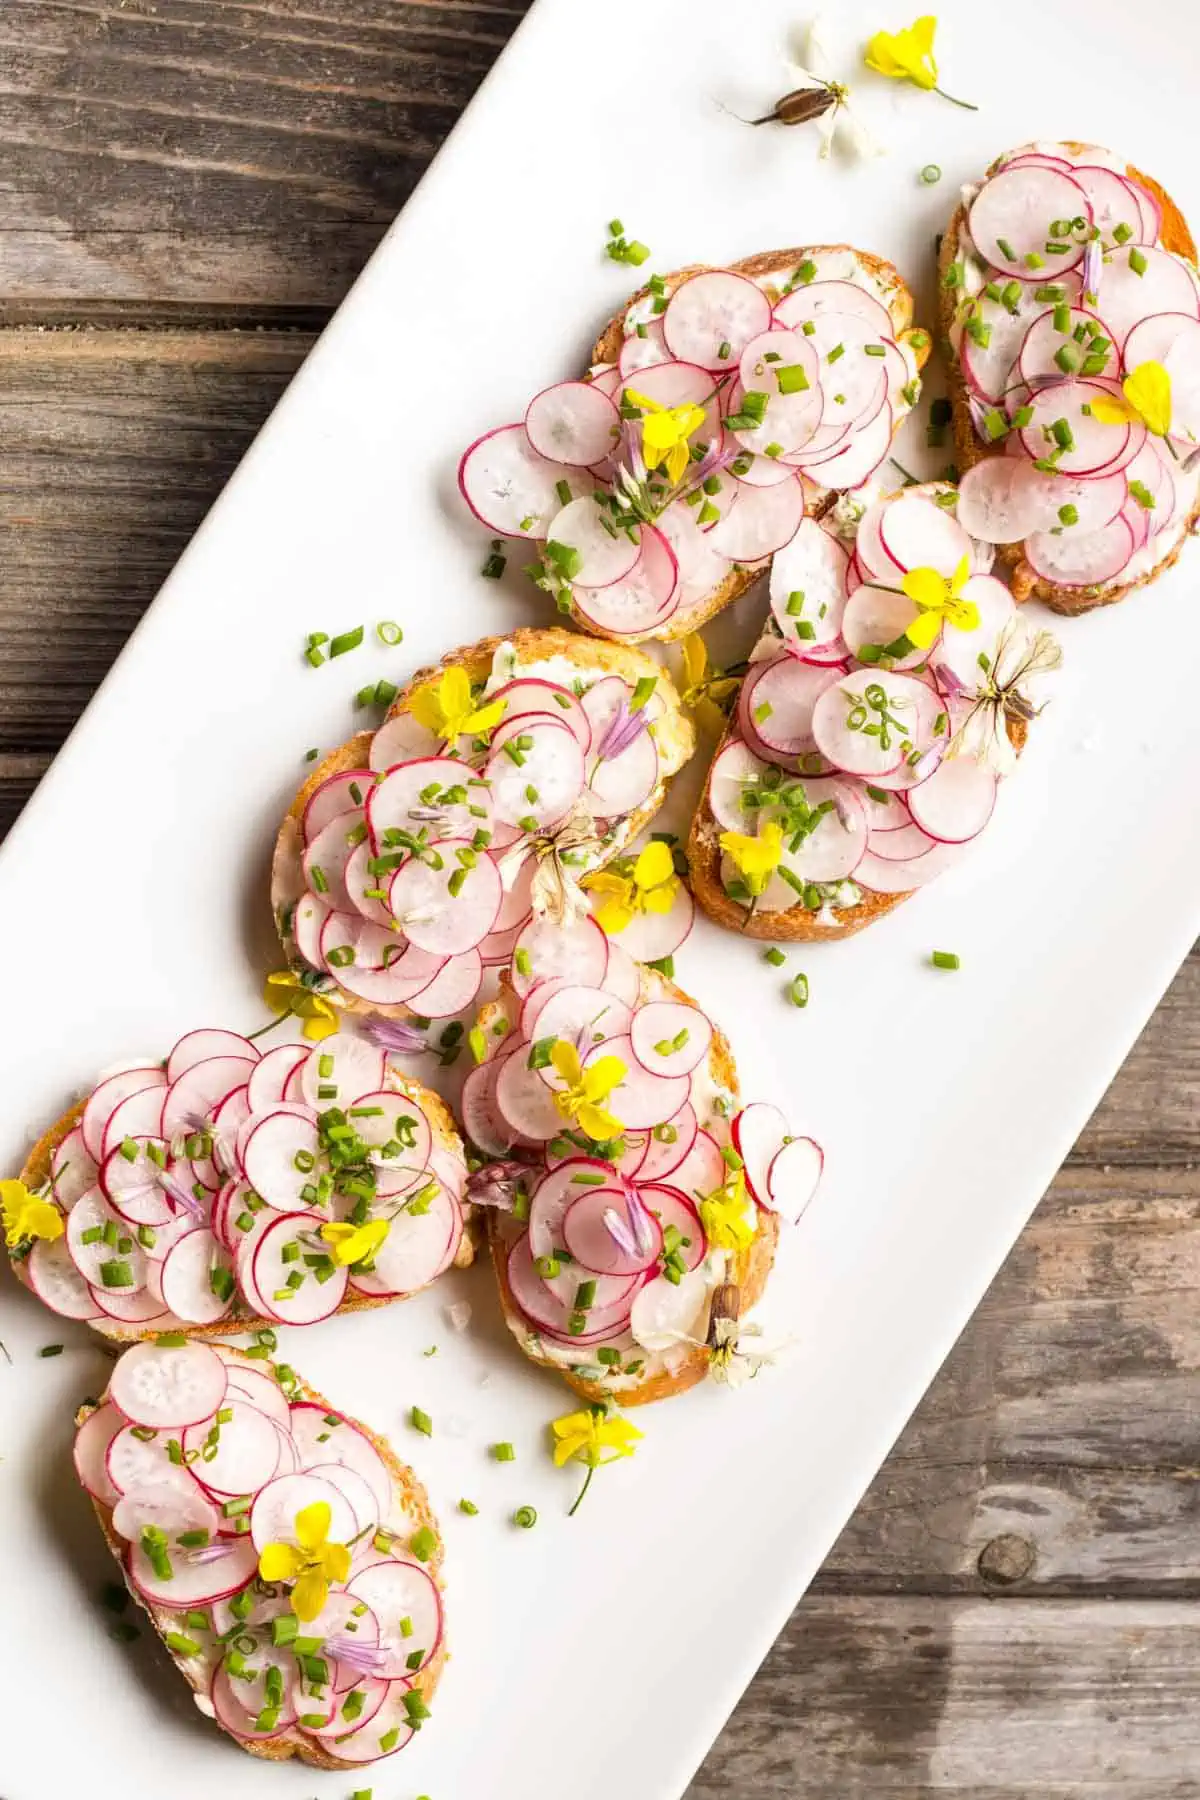 Overhead shot of a white platter of buttered radish toasts topped with fresh  herbs and edible flowers on top.